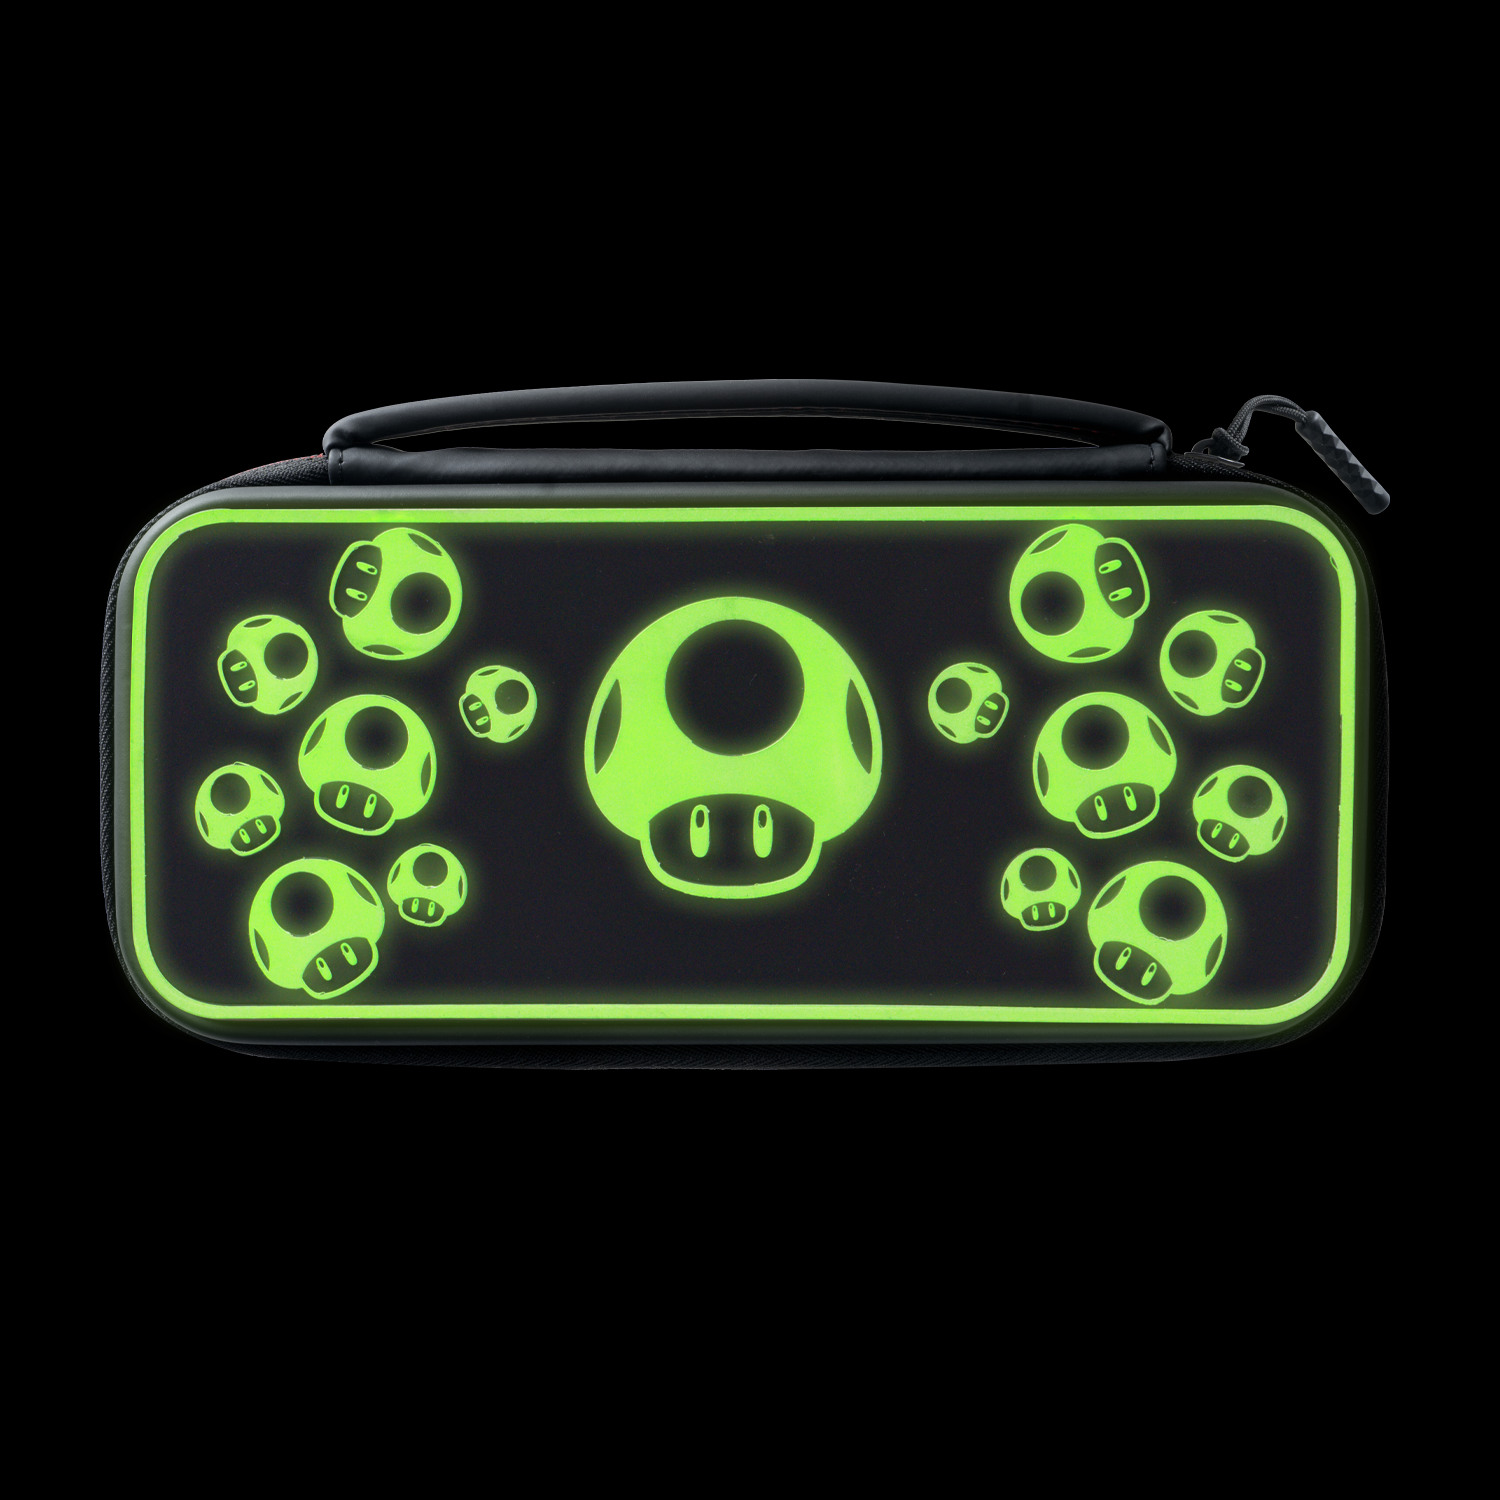 PDP Travel Case Plus 500-224-1UP NSW, 1 Up Glow in the Dark